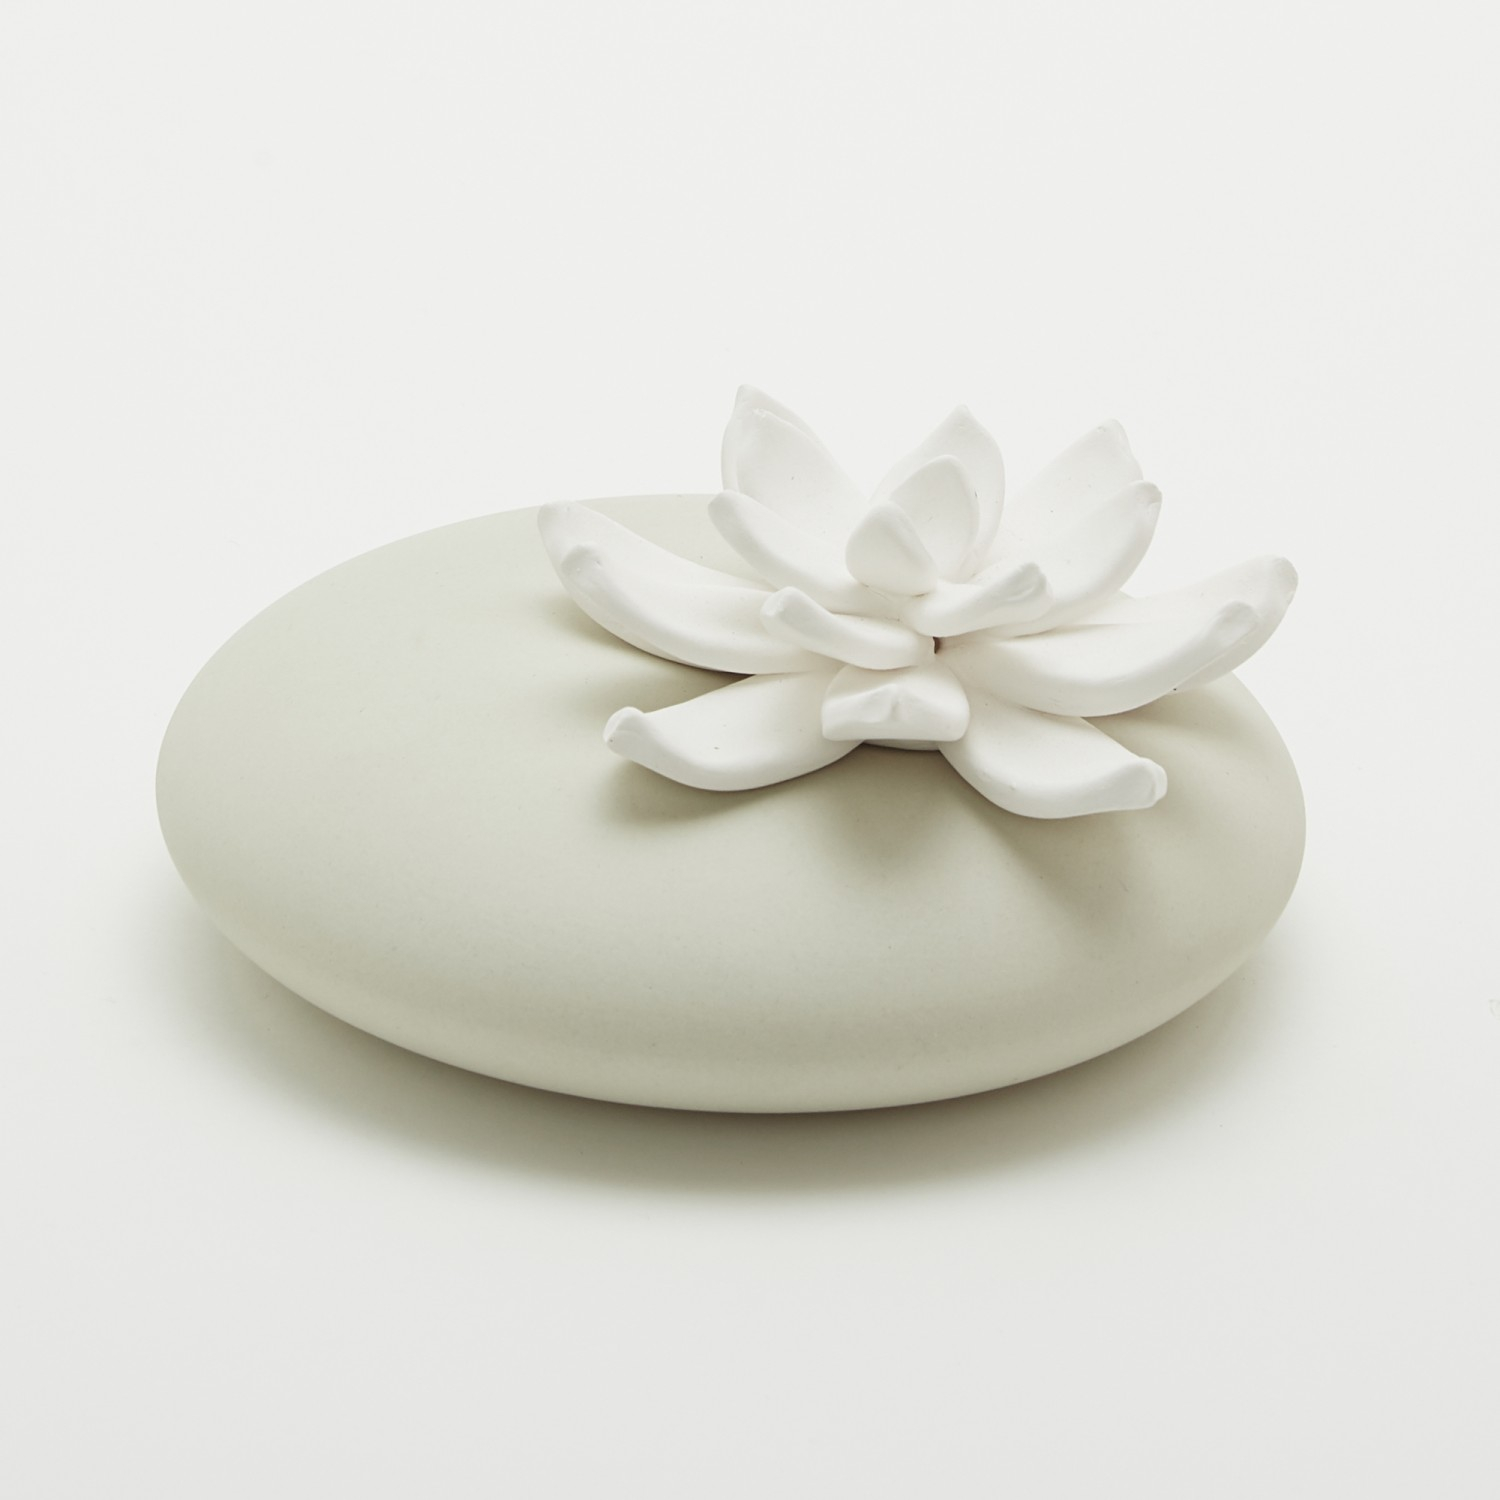 Stylish diffuser with a flying rose pattern - ANOQ